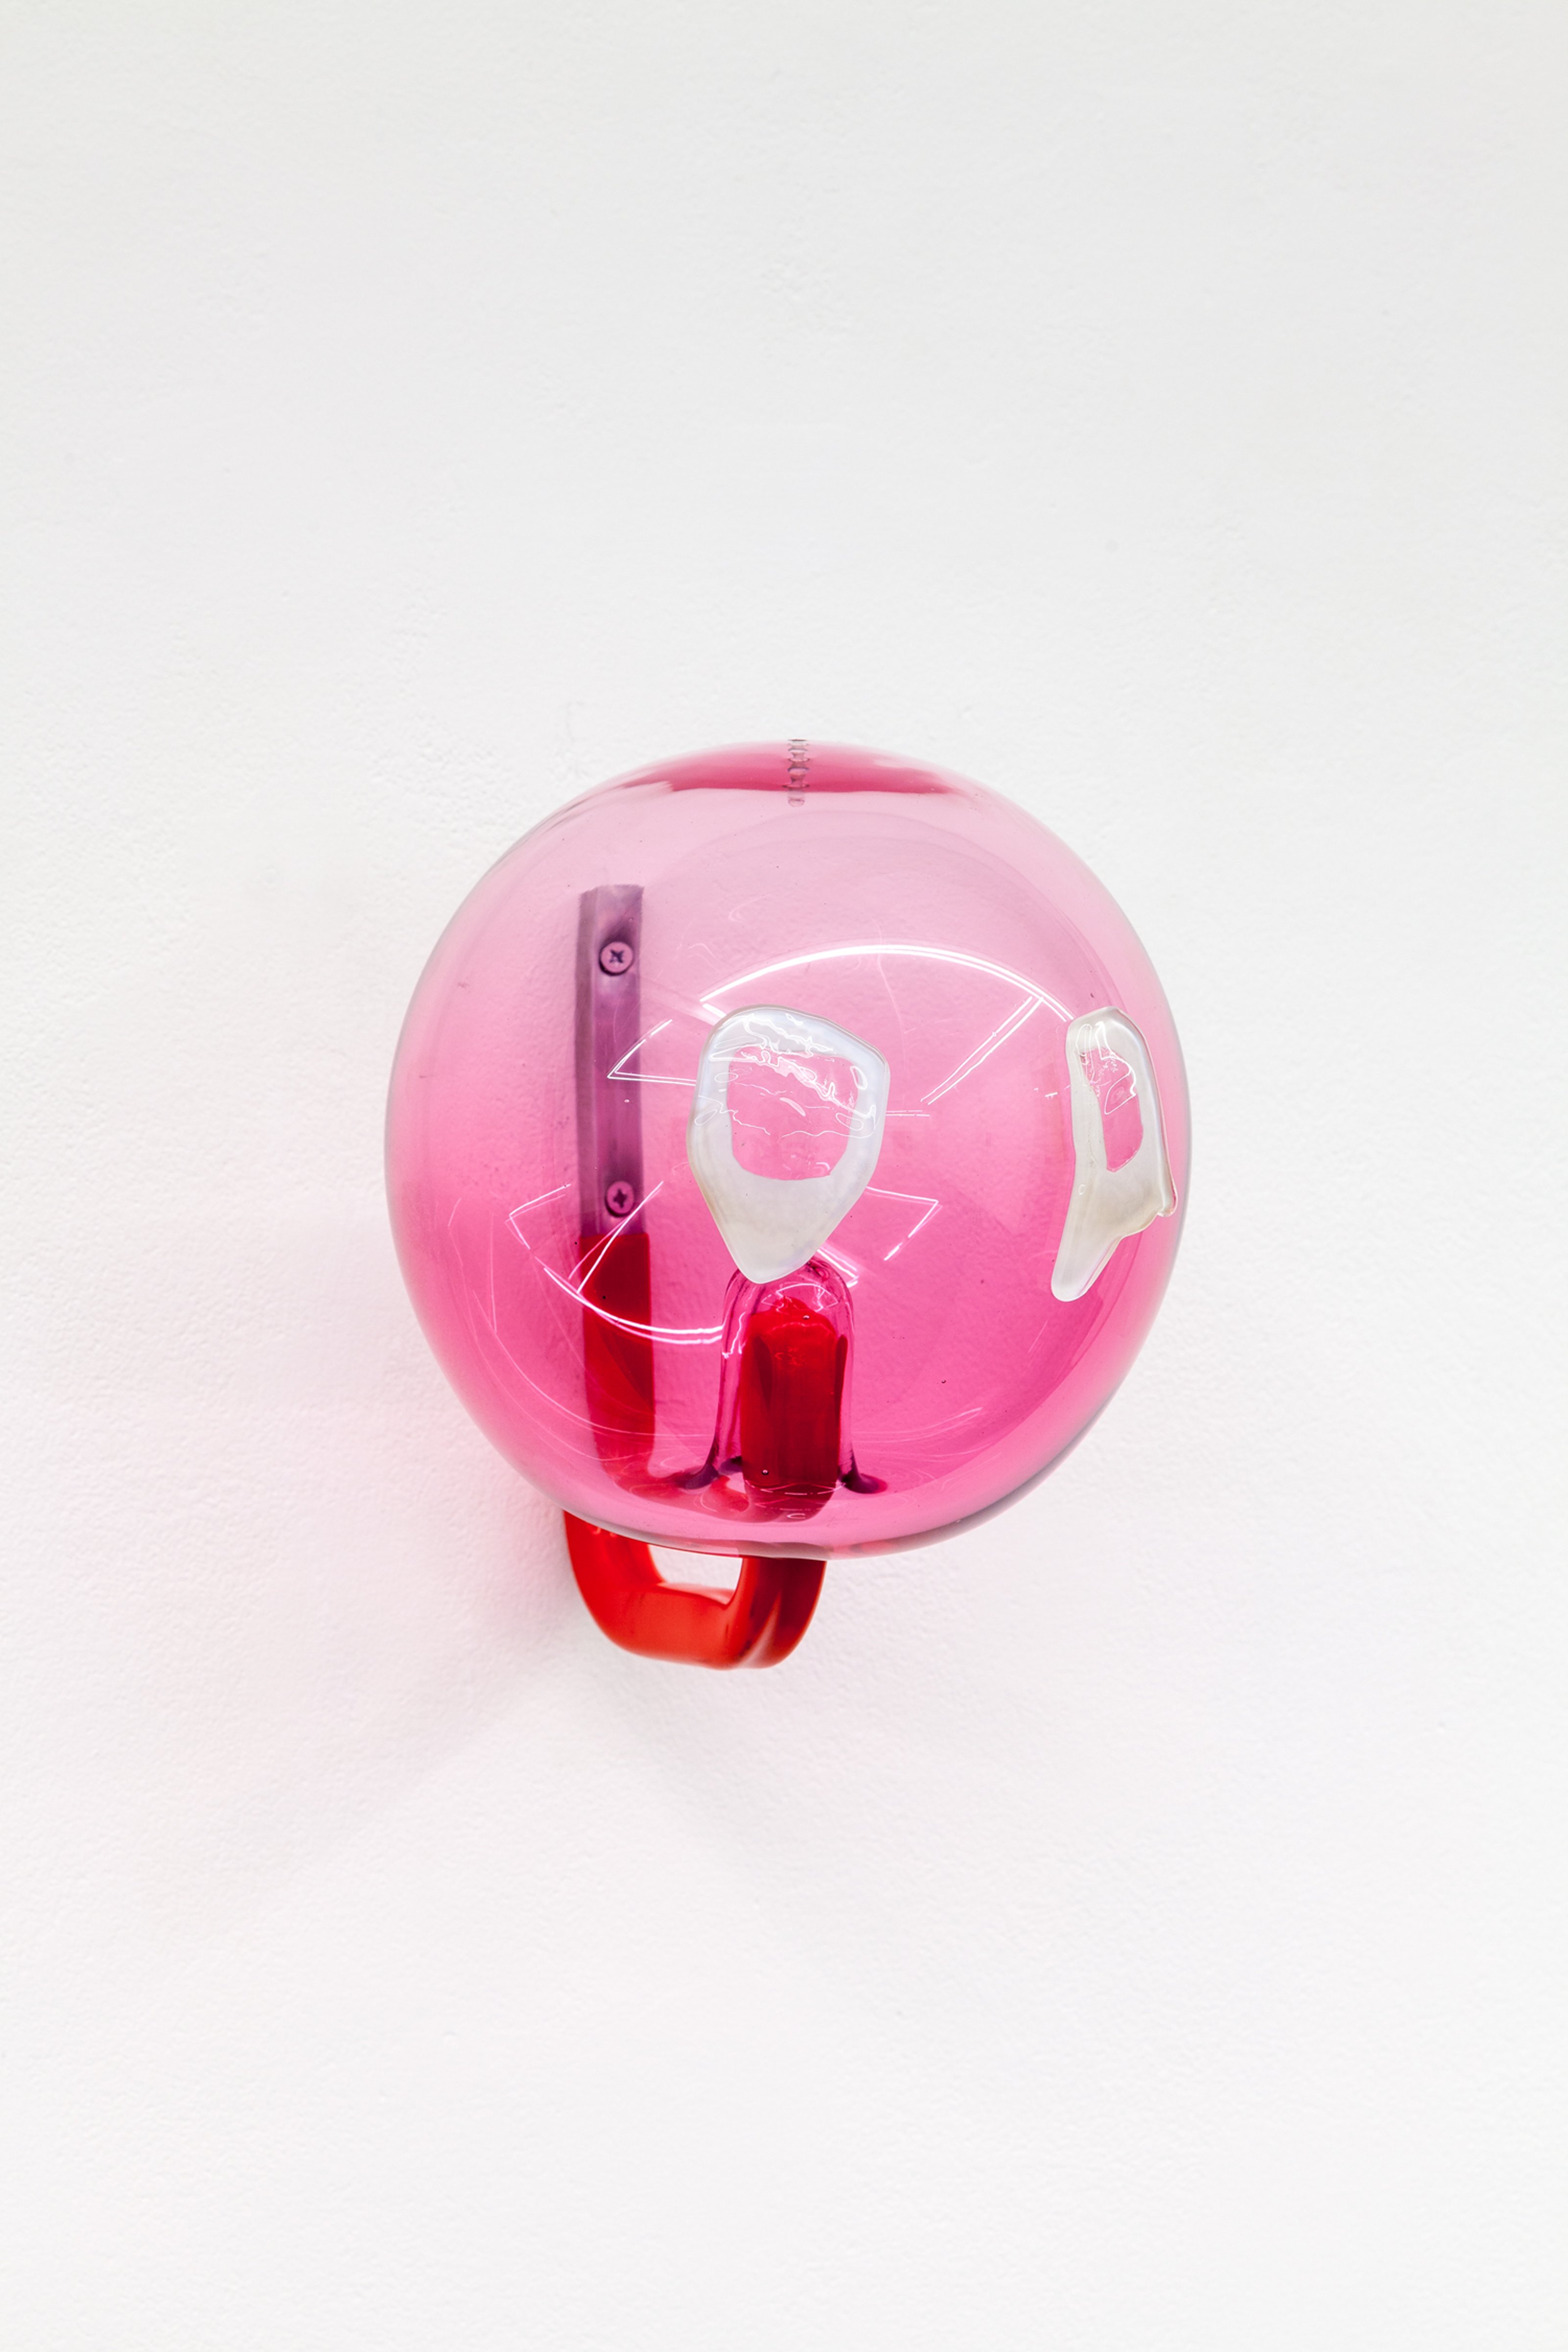 A pink sphere made of glass is mounted on a white wall via a metal hanger.